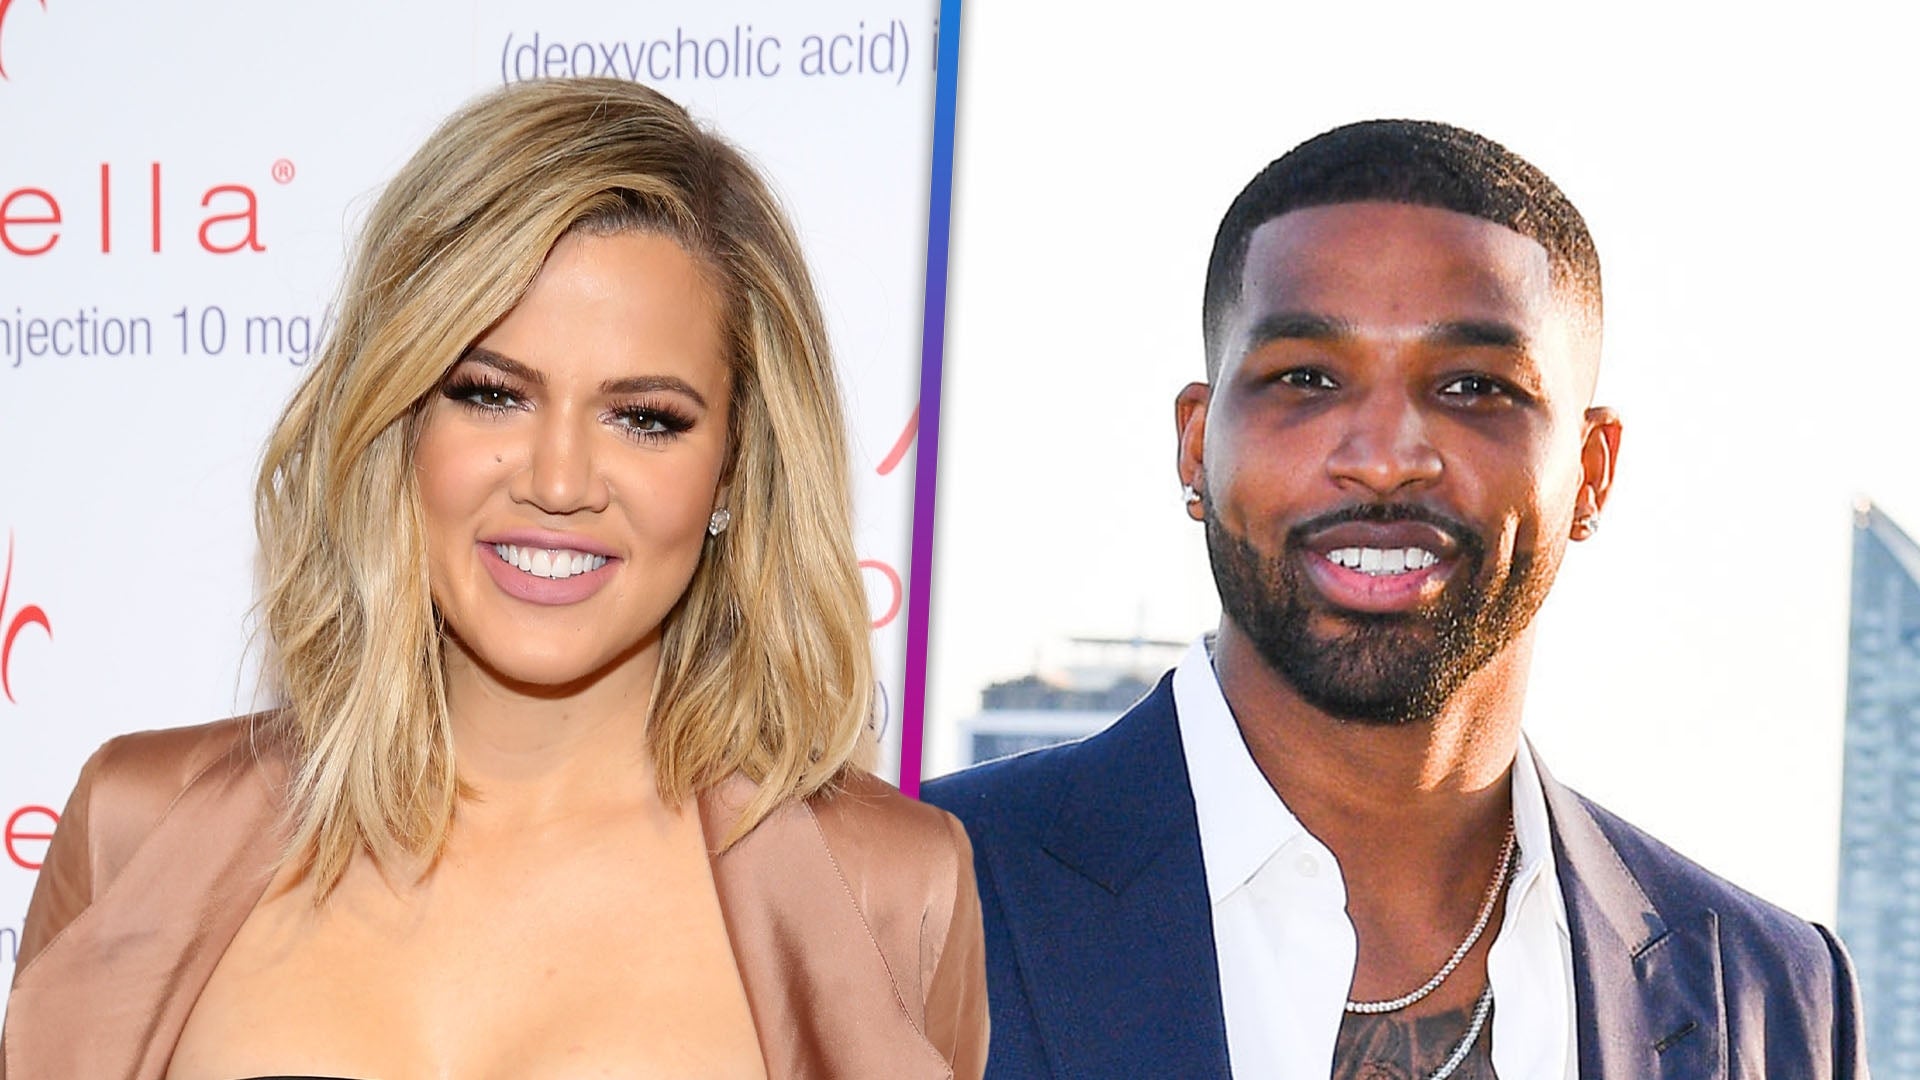 Why Khloé Kardashian Has Been Spending a Lot of Time With Tristan Thompson (Source)